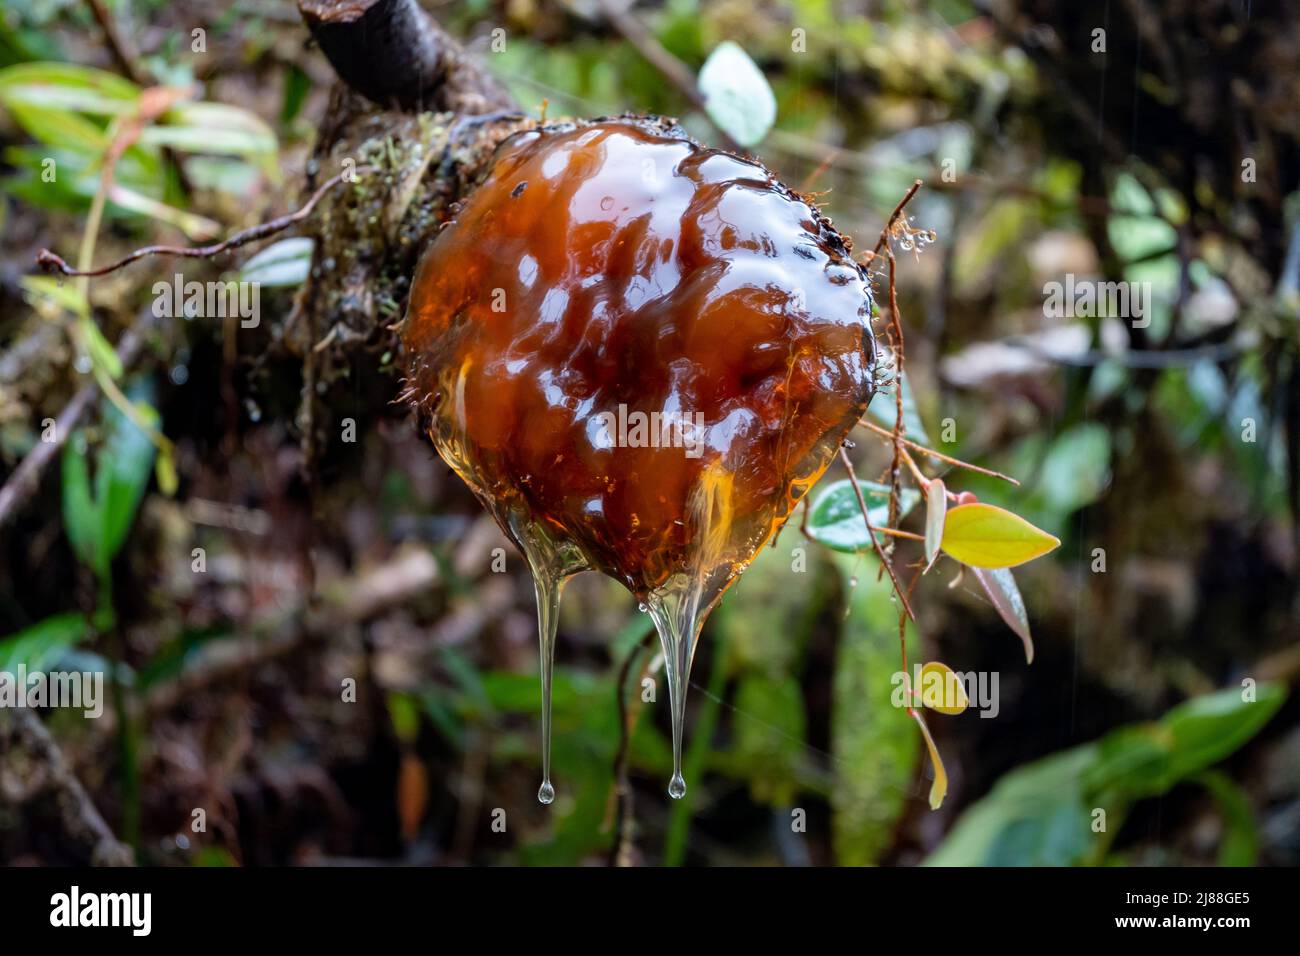 Tree resin oozing out of a broken limb. Colombia, South America. Stock Photo